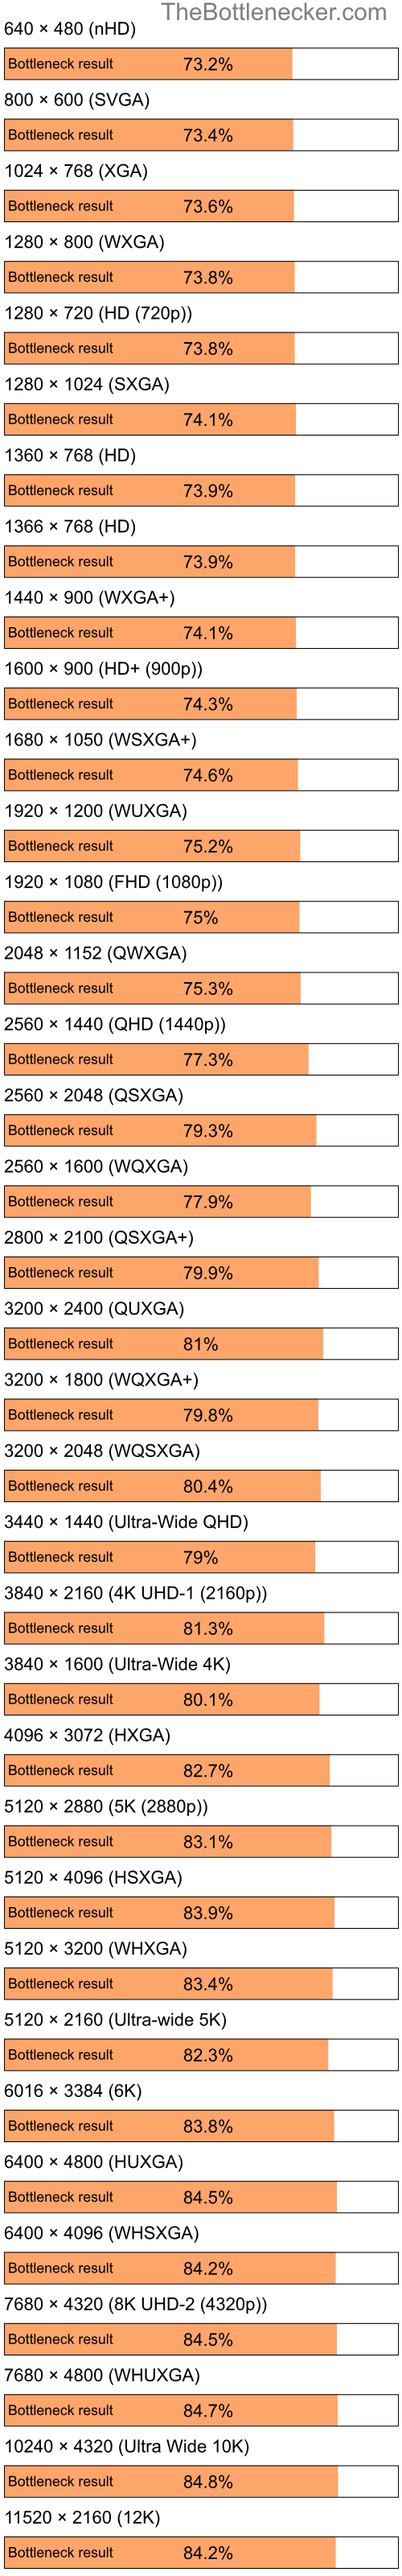 Bottleneck results by resolution for Intel Atom Z520 and AMD Mobility Radeon HD 2300 in7 Days to Die